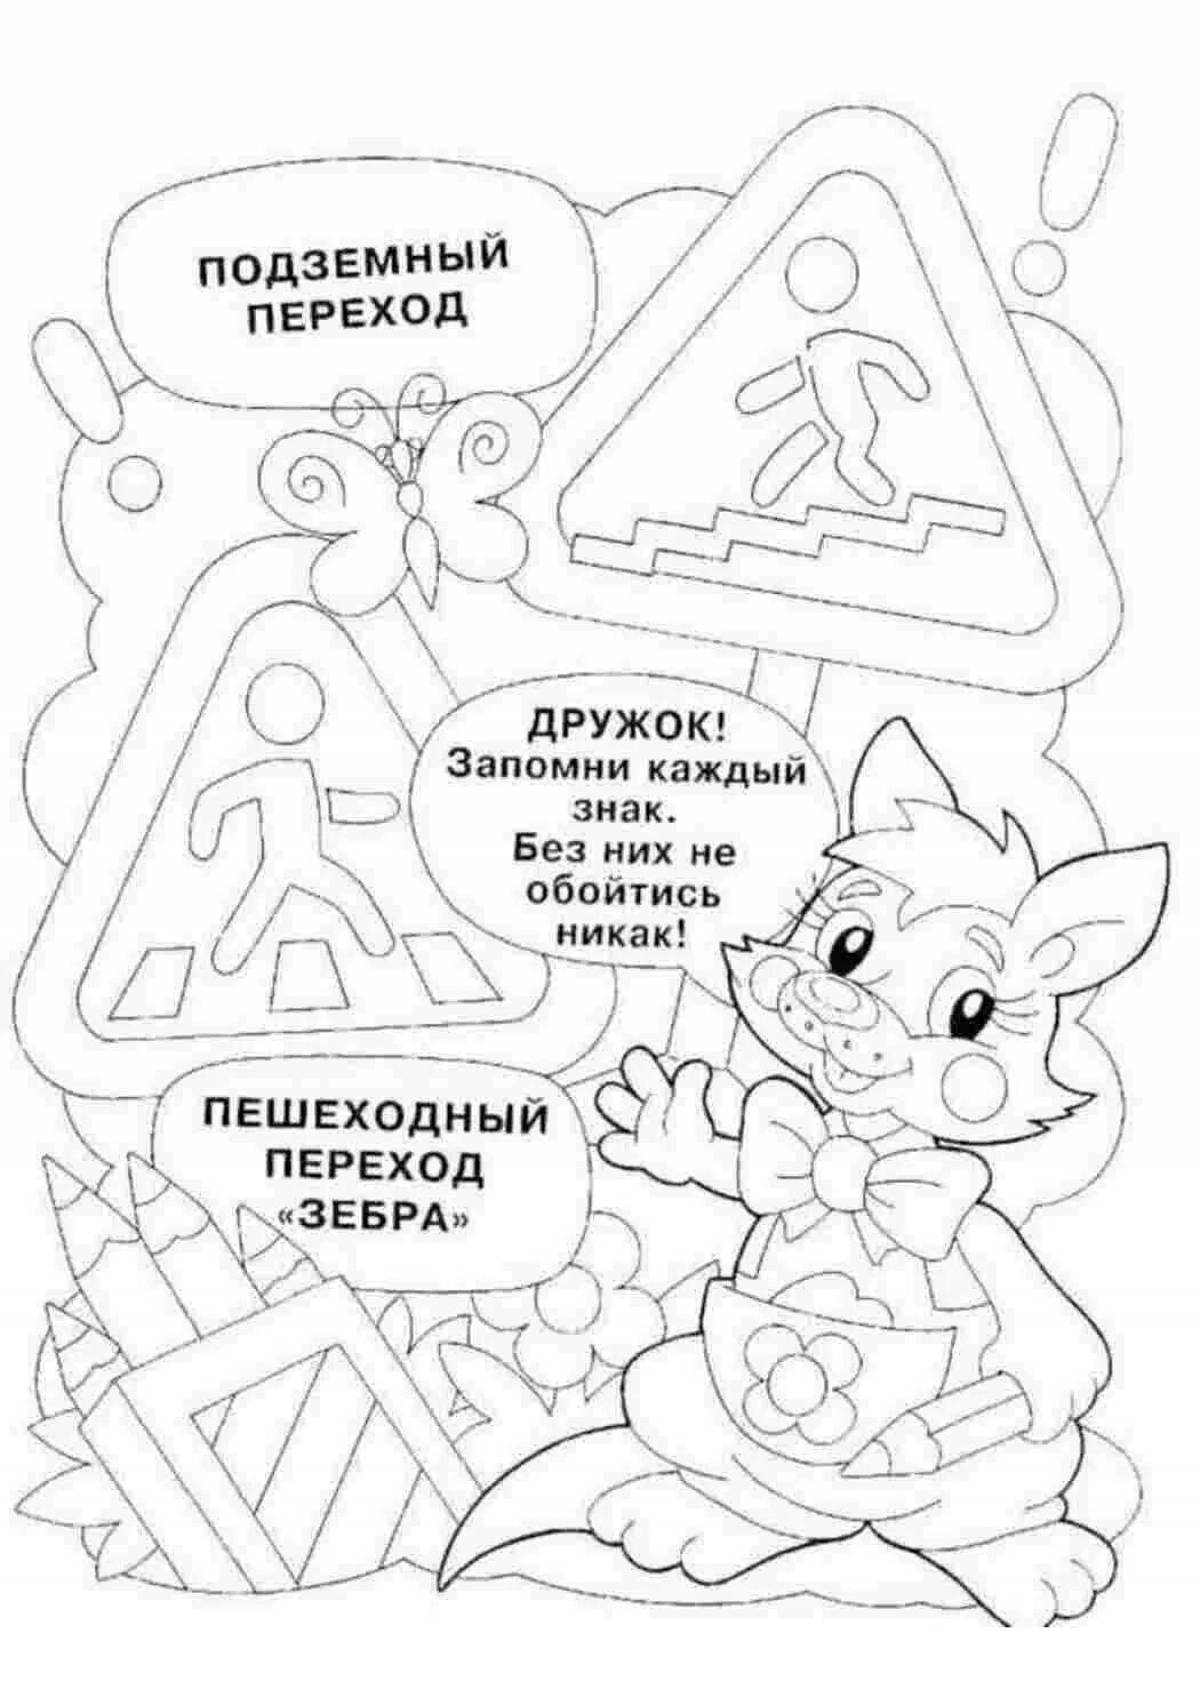 Adorable safety alphabet coloring page for kids